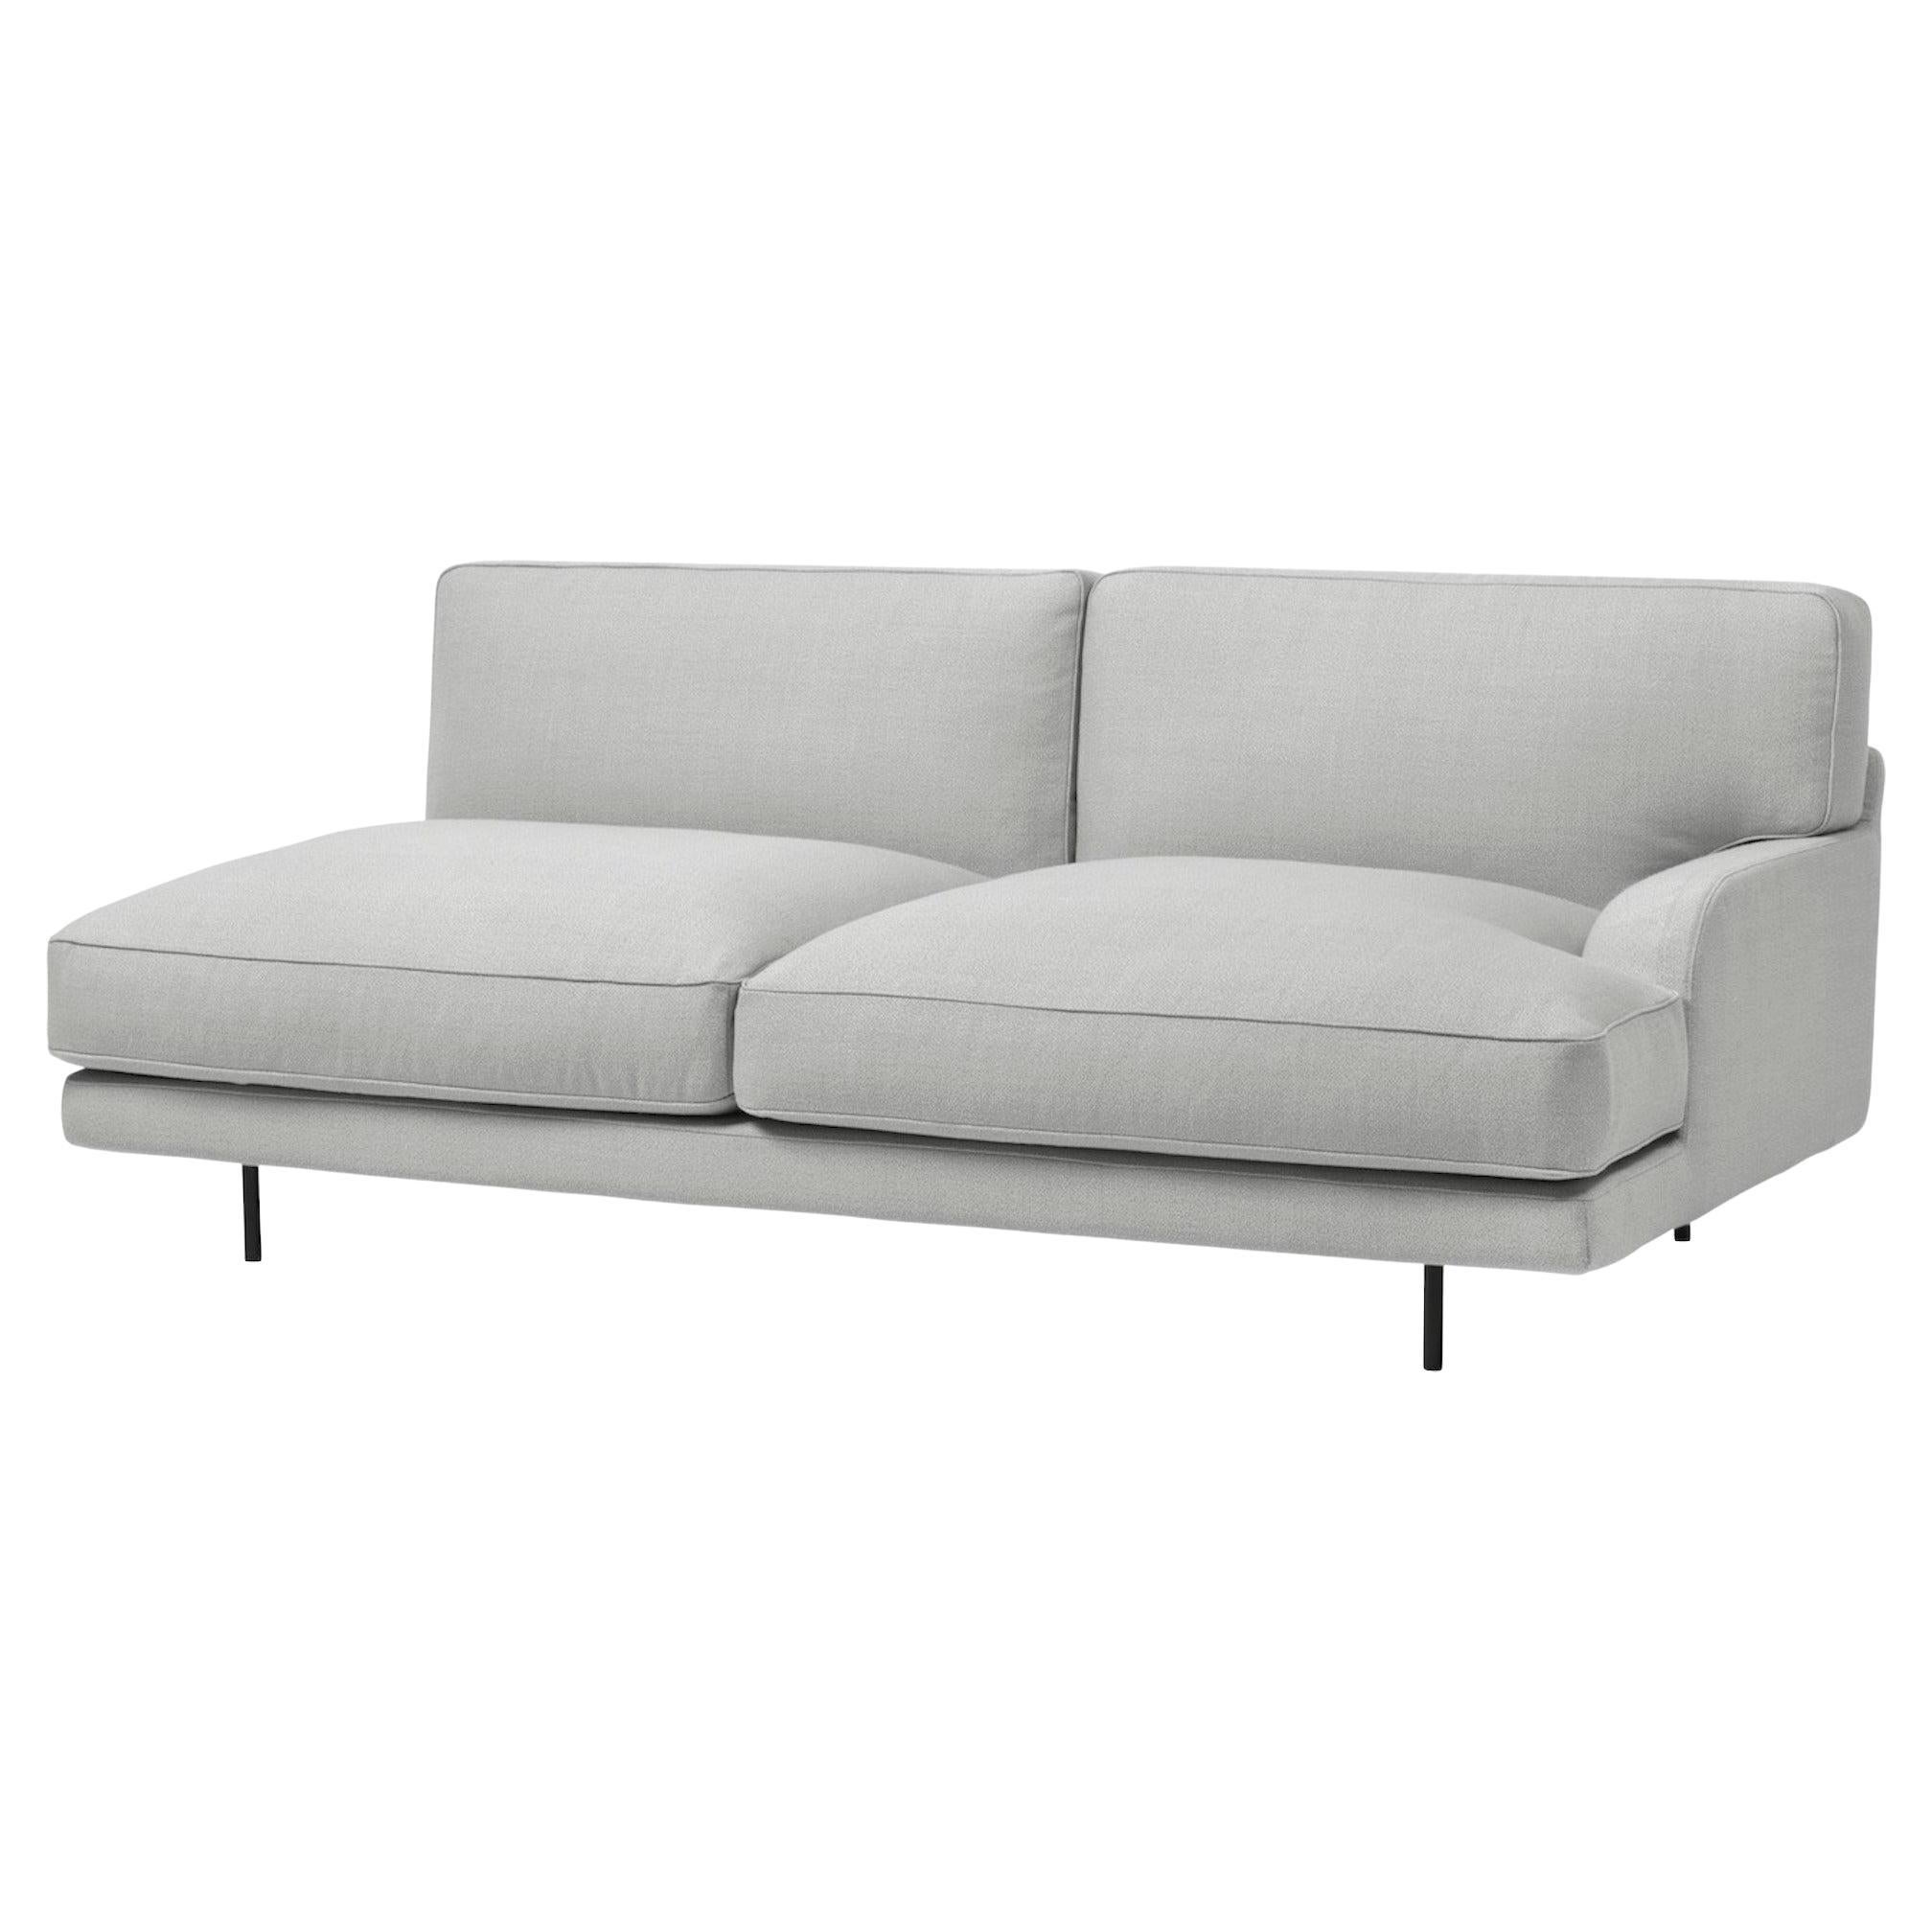 Customizable Gubi Flaneur Module, Chaise Longue with Righ Designed by Gamfratesi For Sale 9